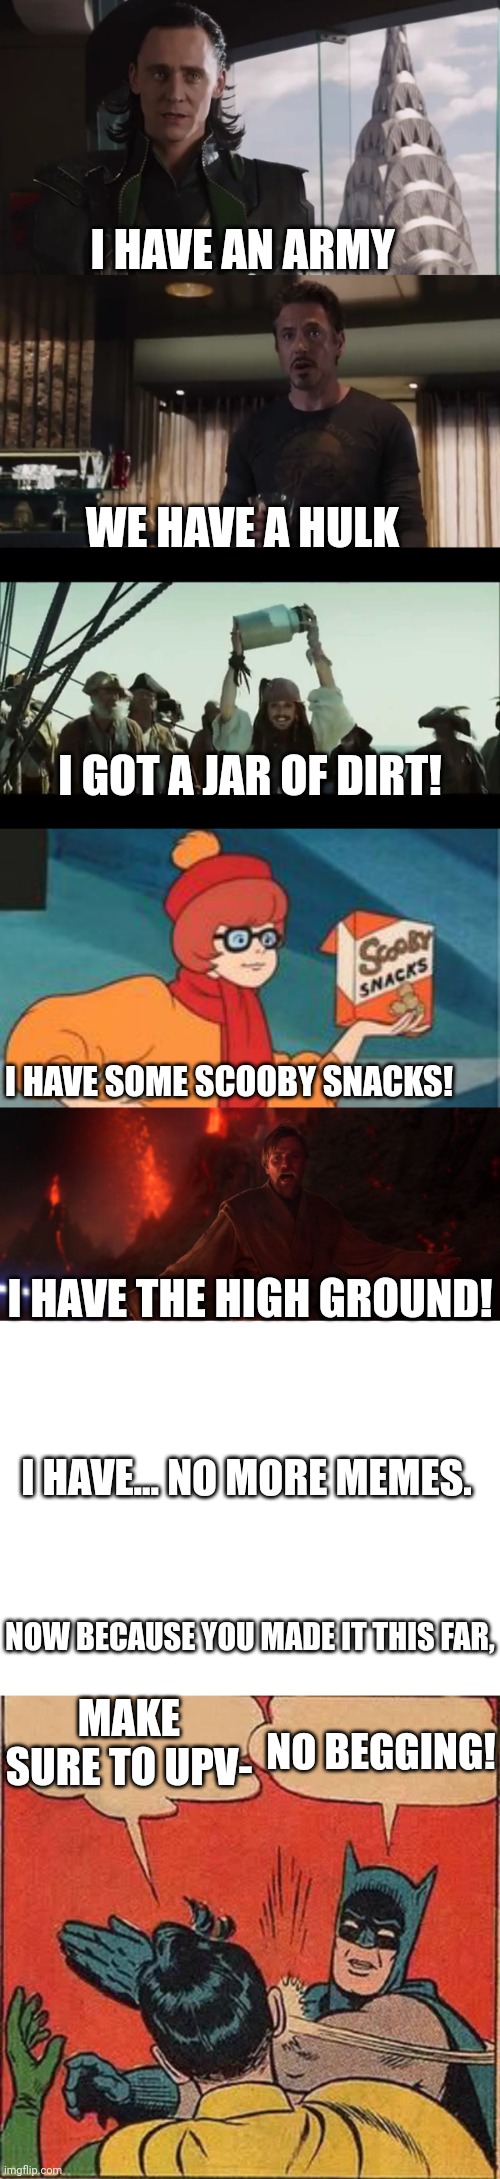 This took a while | I HAVE AN ARMY; WE HAVE A HULK; I GOT A JAR OF DIRT! I HAVE SOME SCOOBY SNACKS! I HAVE THE HIGH GROUND! I HAVE... NO MORE MEMES. NOW BECAUSE YOU MADE IT THIS FAR, MAKE SURE TO UPV-; NO BEGGING! | image tagged in i have an army,i have a jar of,scooby snacks,its over anakin i have the high ground,blank white template,memes | made w/ Imgflip meme maker